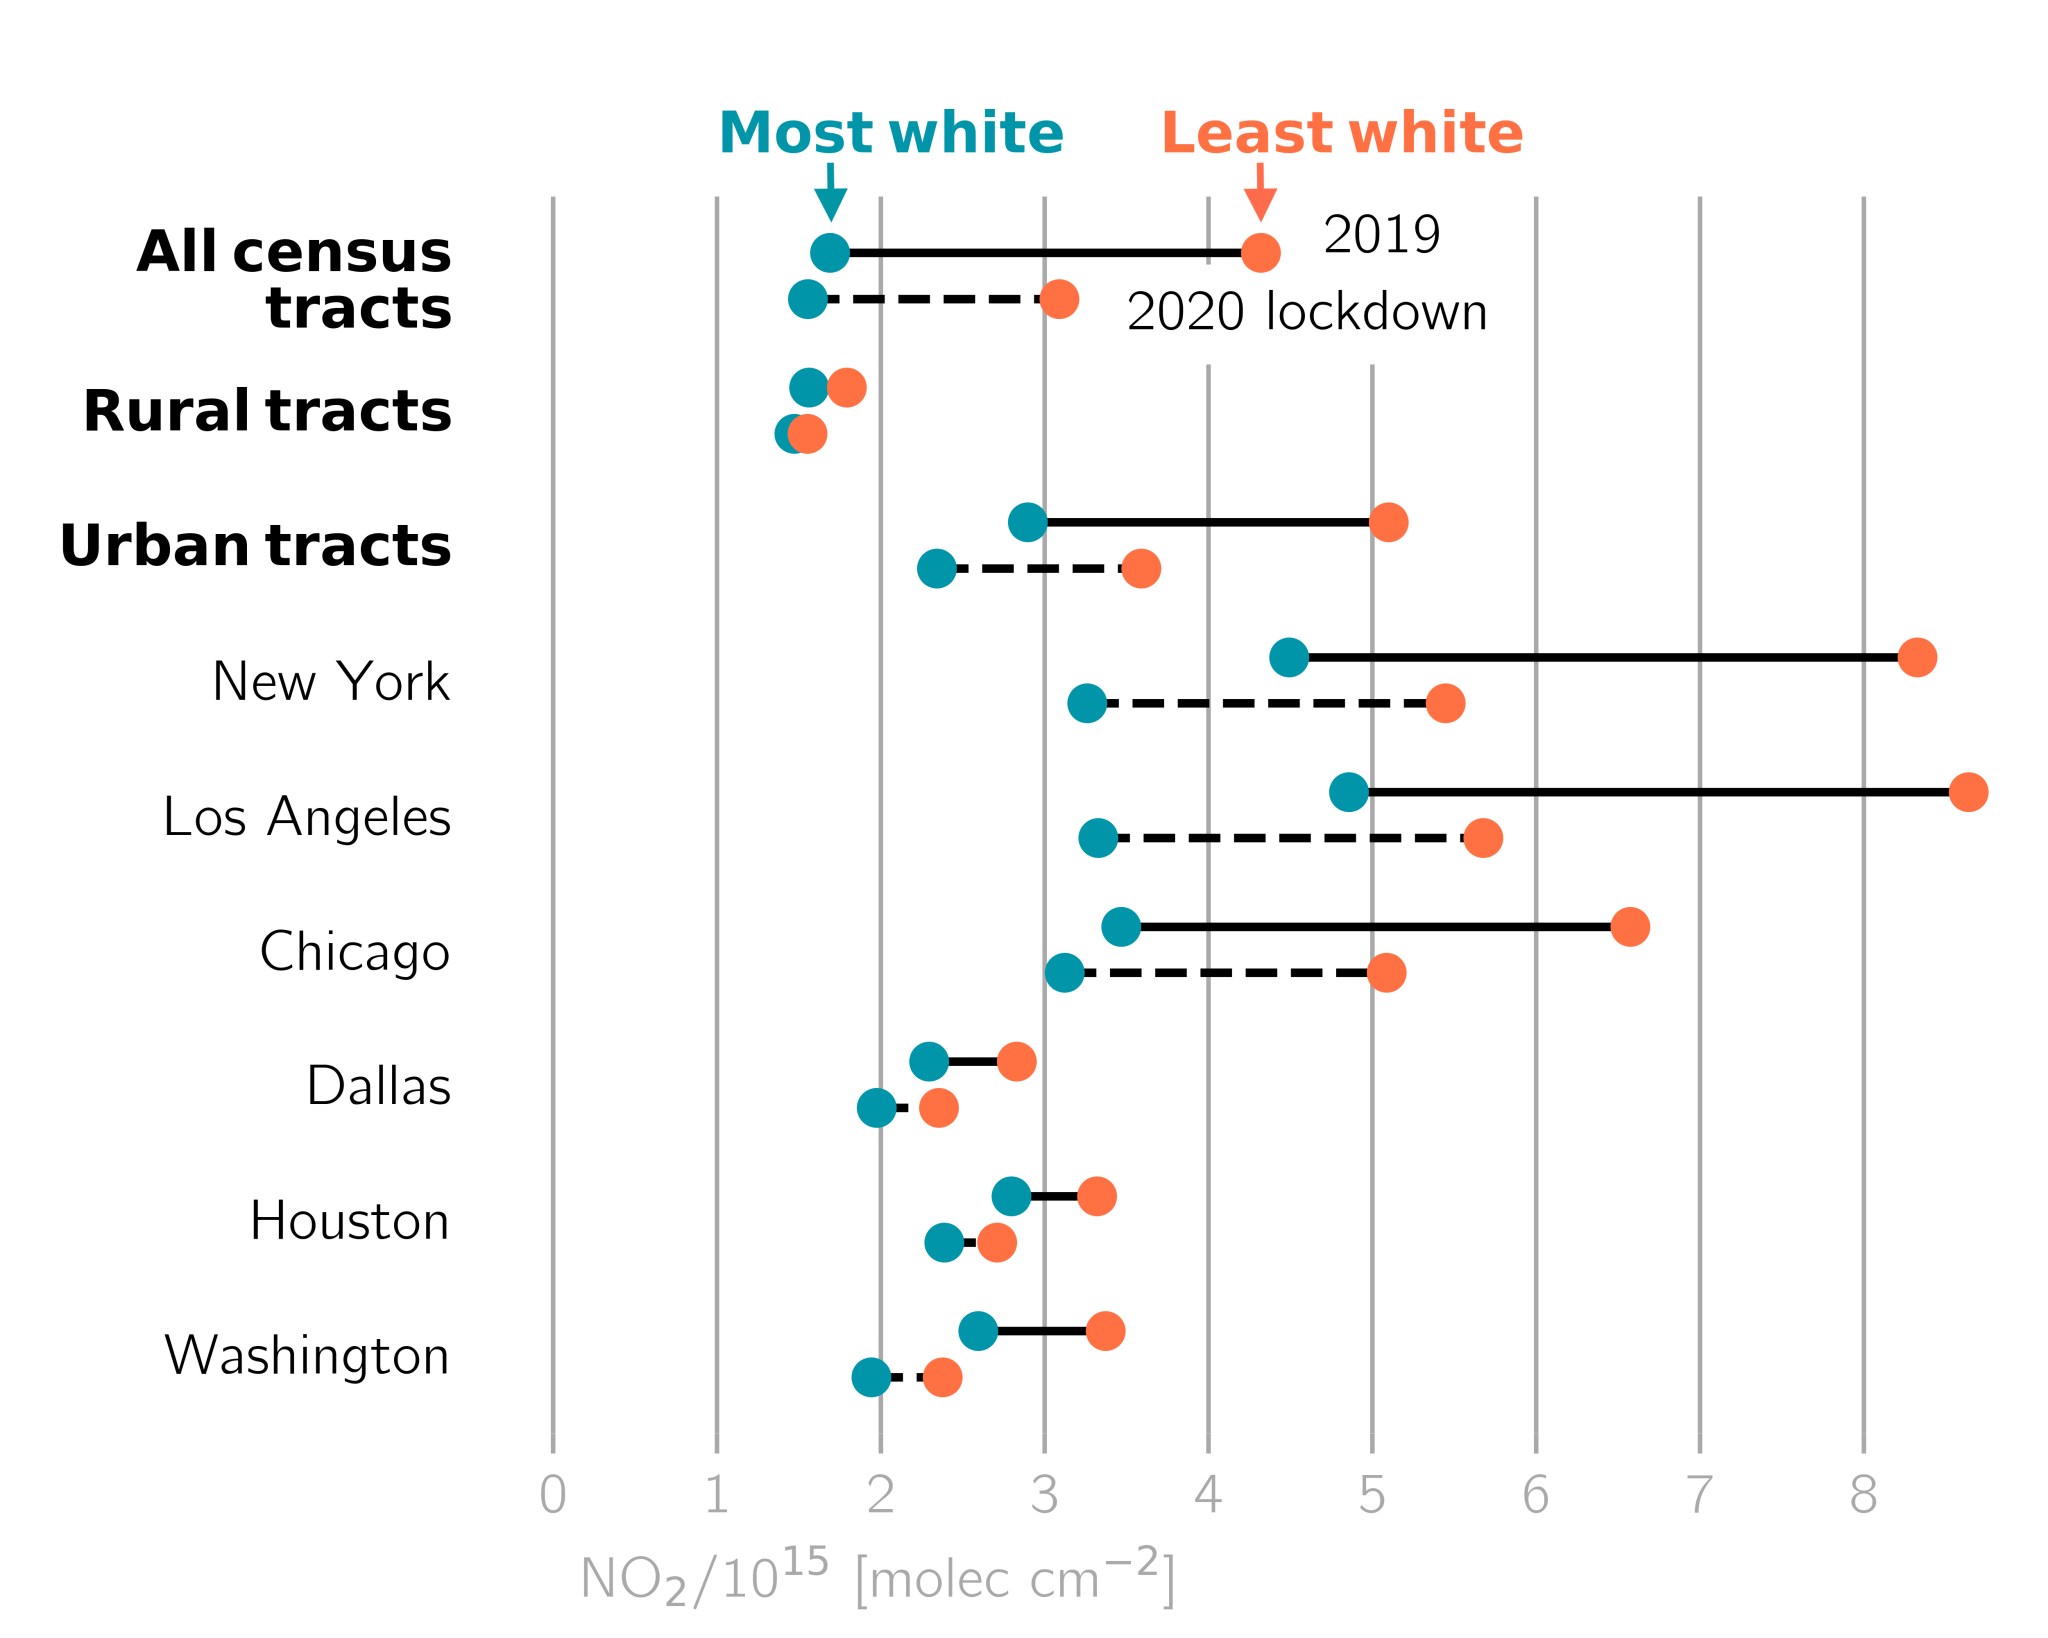 A graph showing how the drops in NO2 during the pandemic were unequal for the most white and least white neighborhoods.